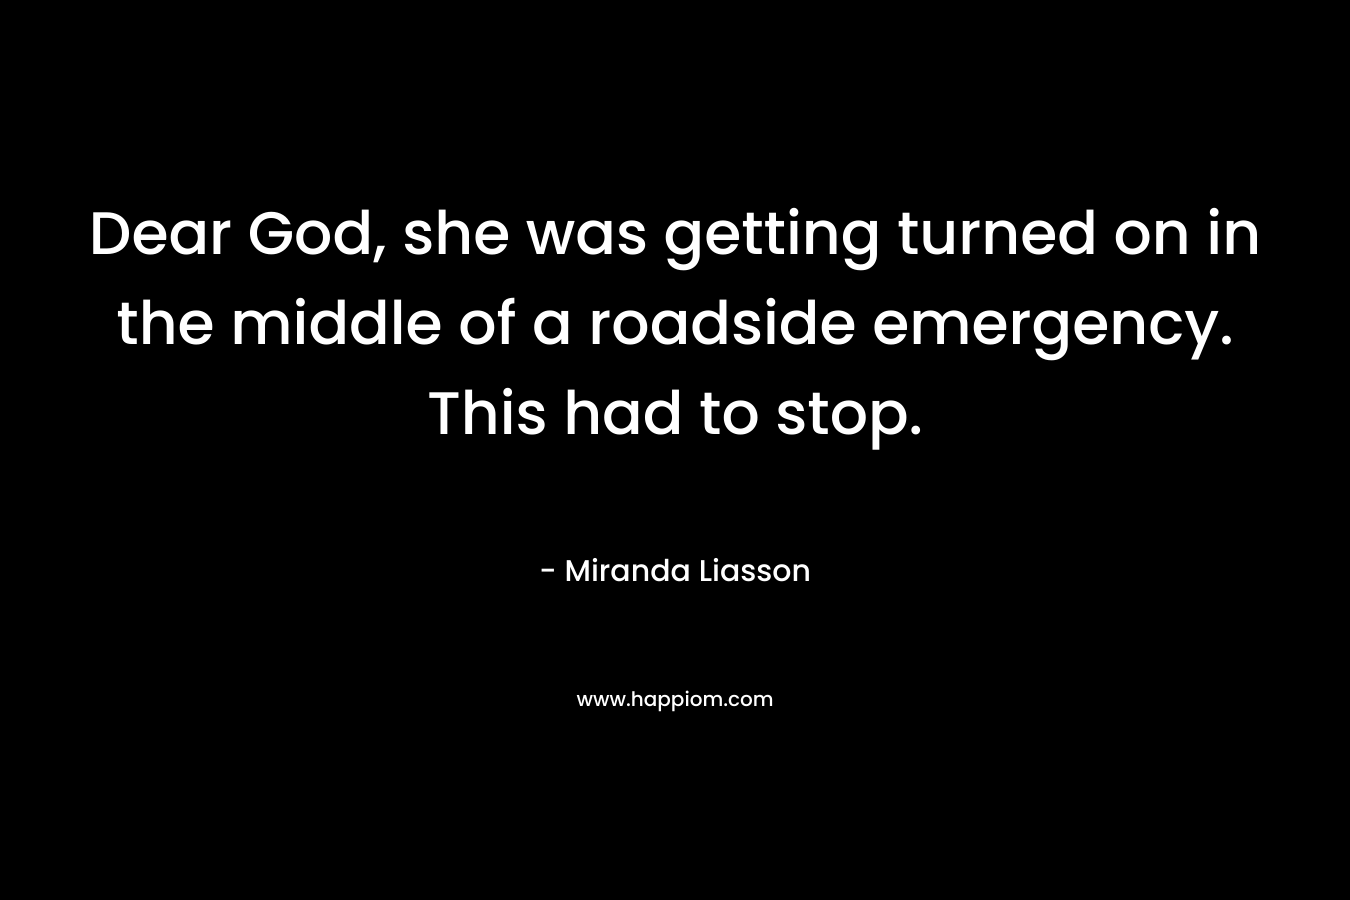 Dear God, she was getting turned on in the middle of a roadside emergency. This had to stop. – Miranda Liasson